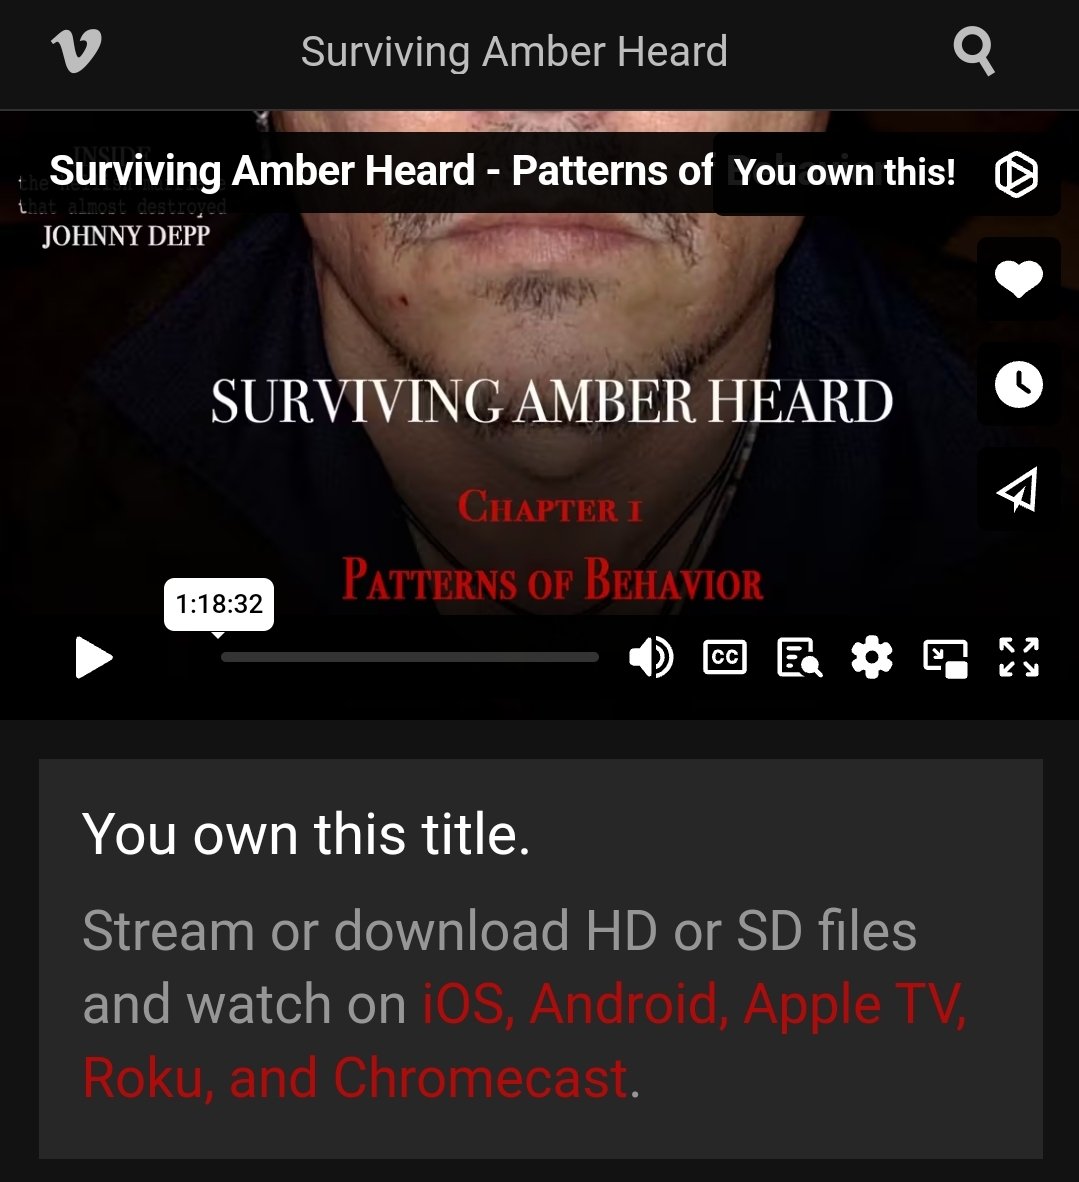 I hesitate to use her name because it contributes to her Q score and, quite frankly, fuck that, HOWEVER if you're incensed by the recent attempts to rehab her public image and would like a dose of cold hard facts, #SurvivingAmberHeard is a hell of a watch. Link below.